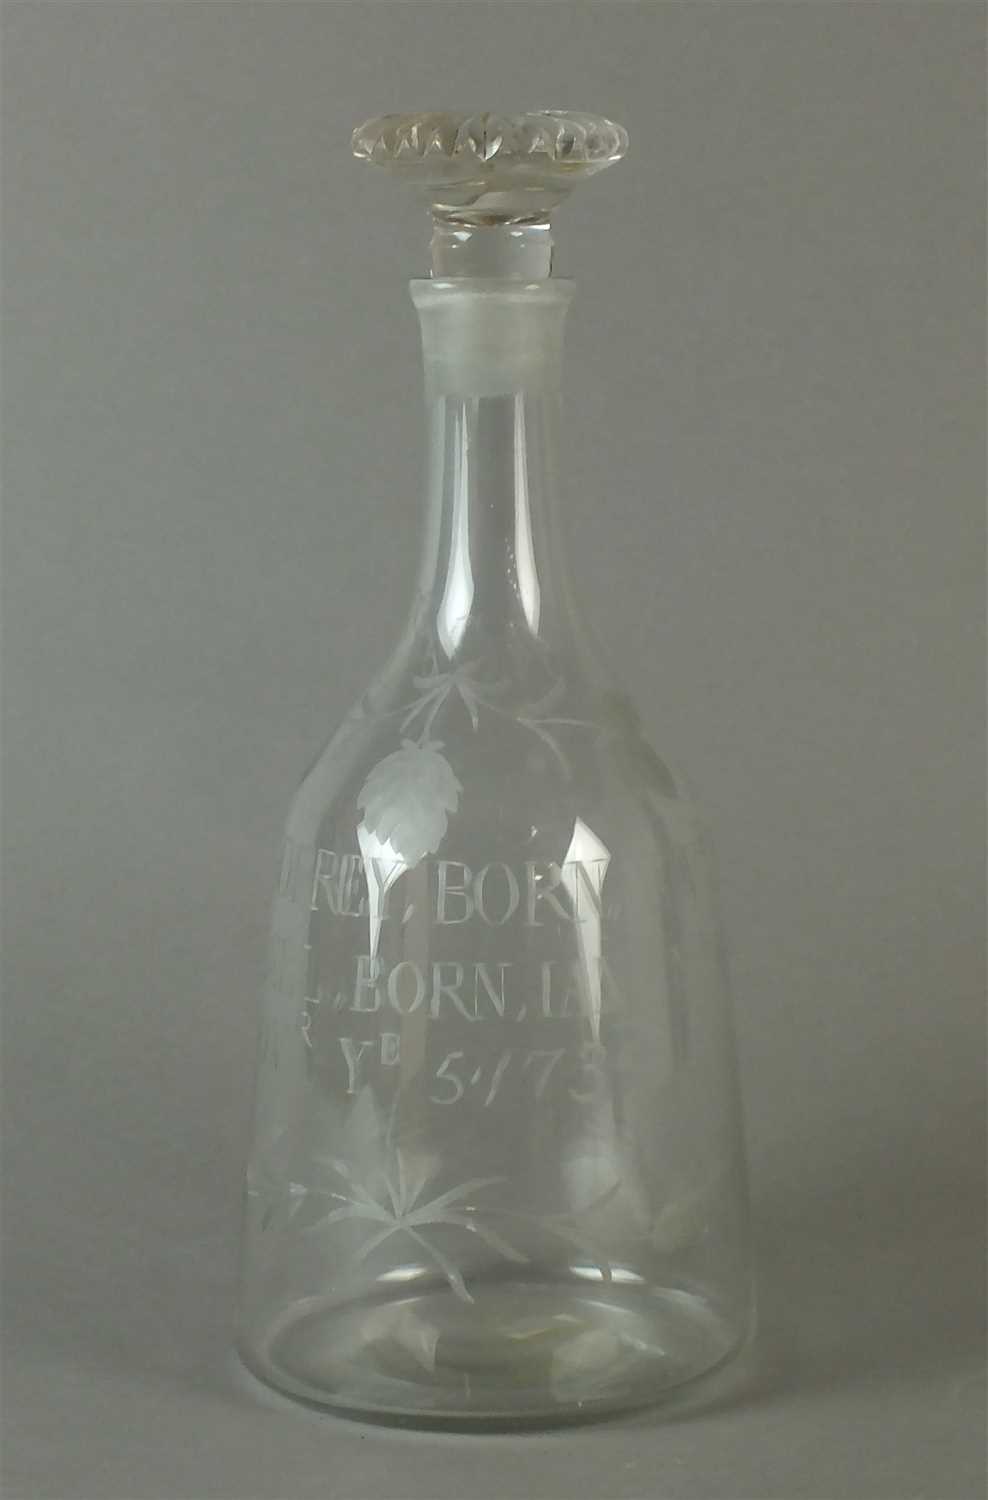 19th century glass decanter and stopper